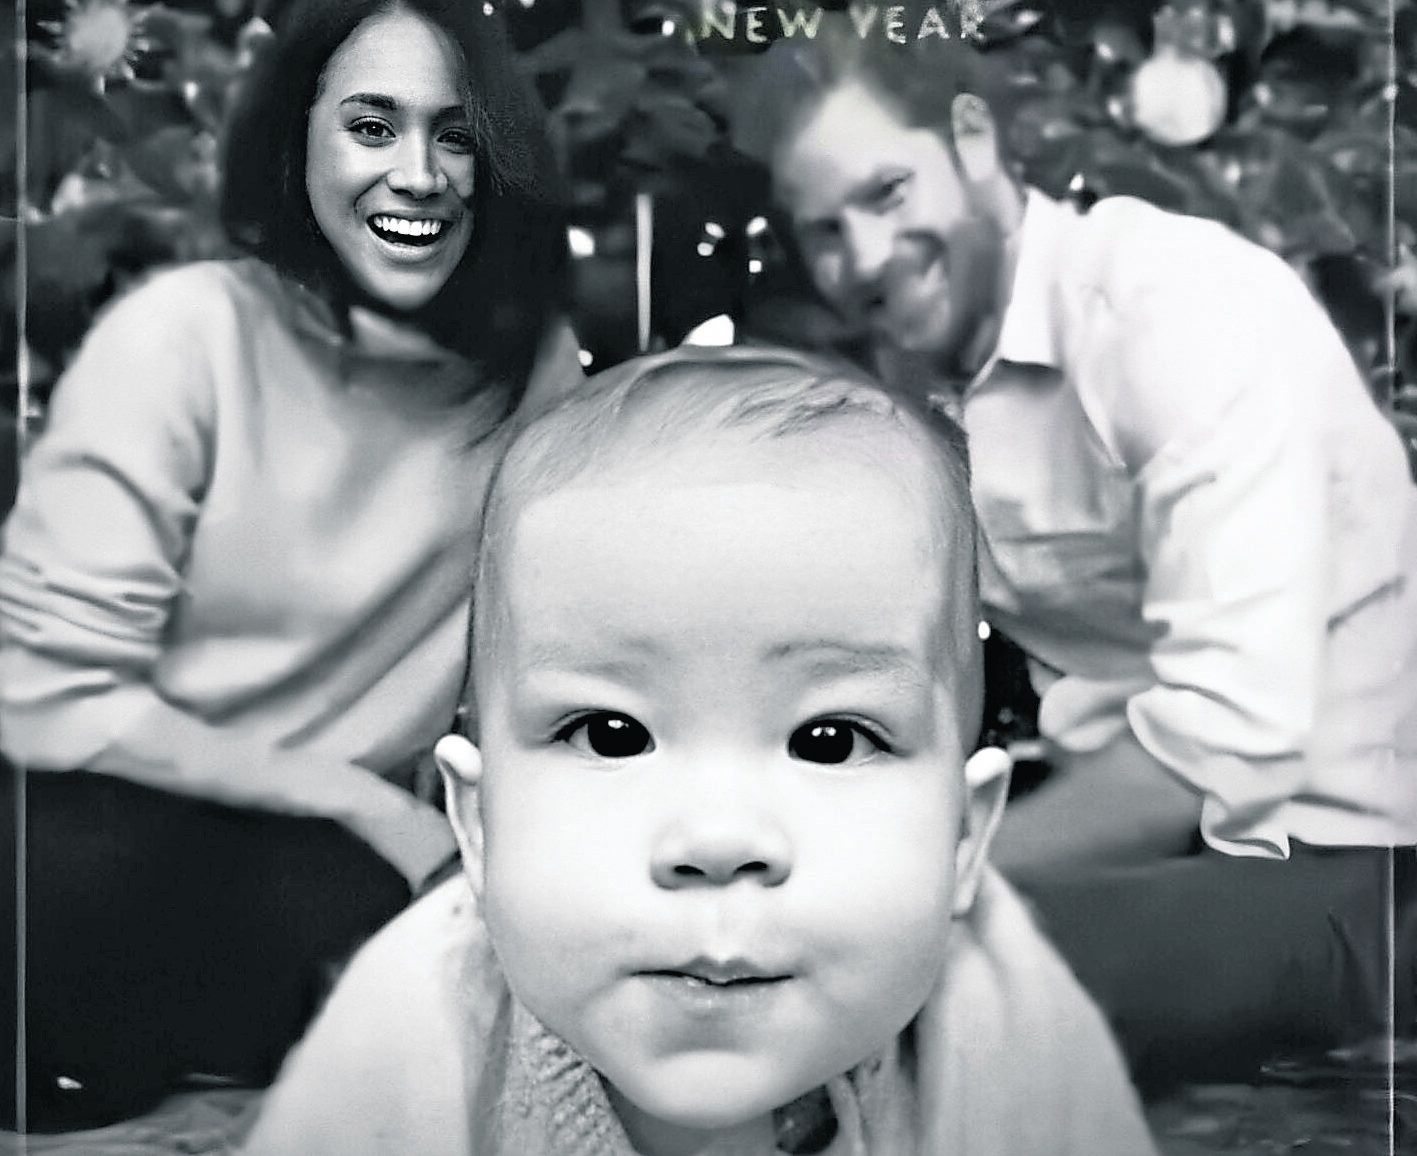 The 2019 Christmas card of the Duke and Duchess of Sussex with their baby son, Archie Harrison Mountbatten-Windsor.